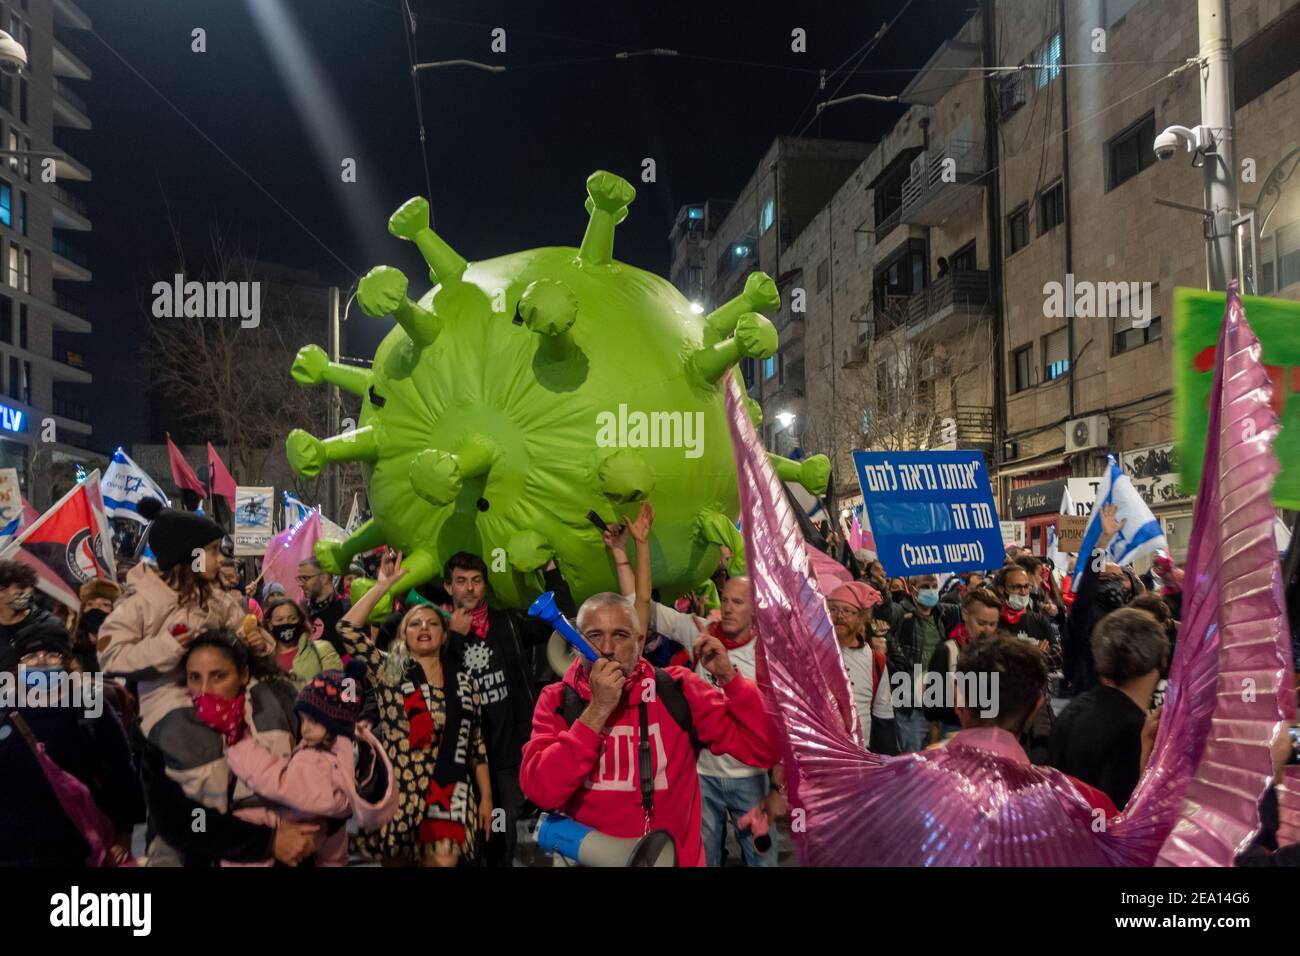 Protesters carry a giant mock-up of a coronavirus as they march through downtown Jerusalem on their way to the prime minister's official residence during a demonstration calling for Benjamin Netanyahu’s resignation citing his government's handling of the coronavirus pandemic and ongoing legal troubles in Jerusalem, Israel. Stock Photo